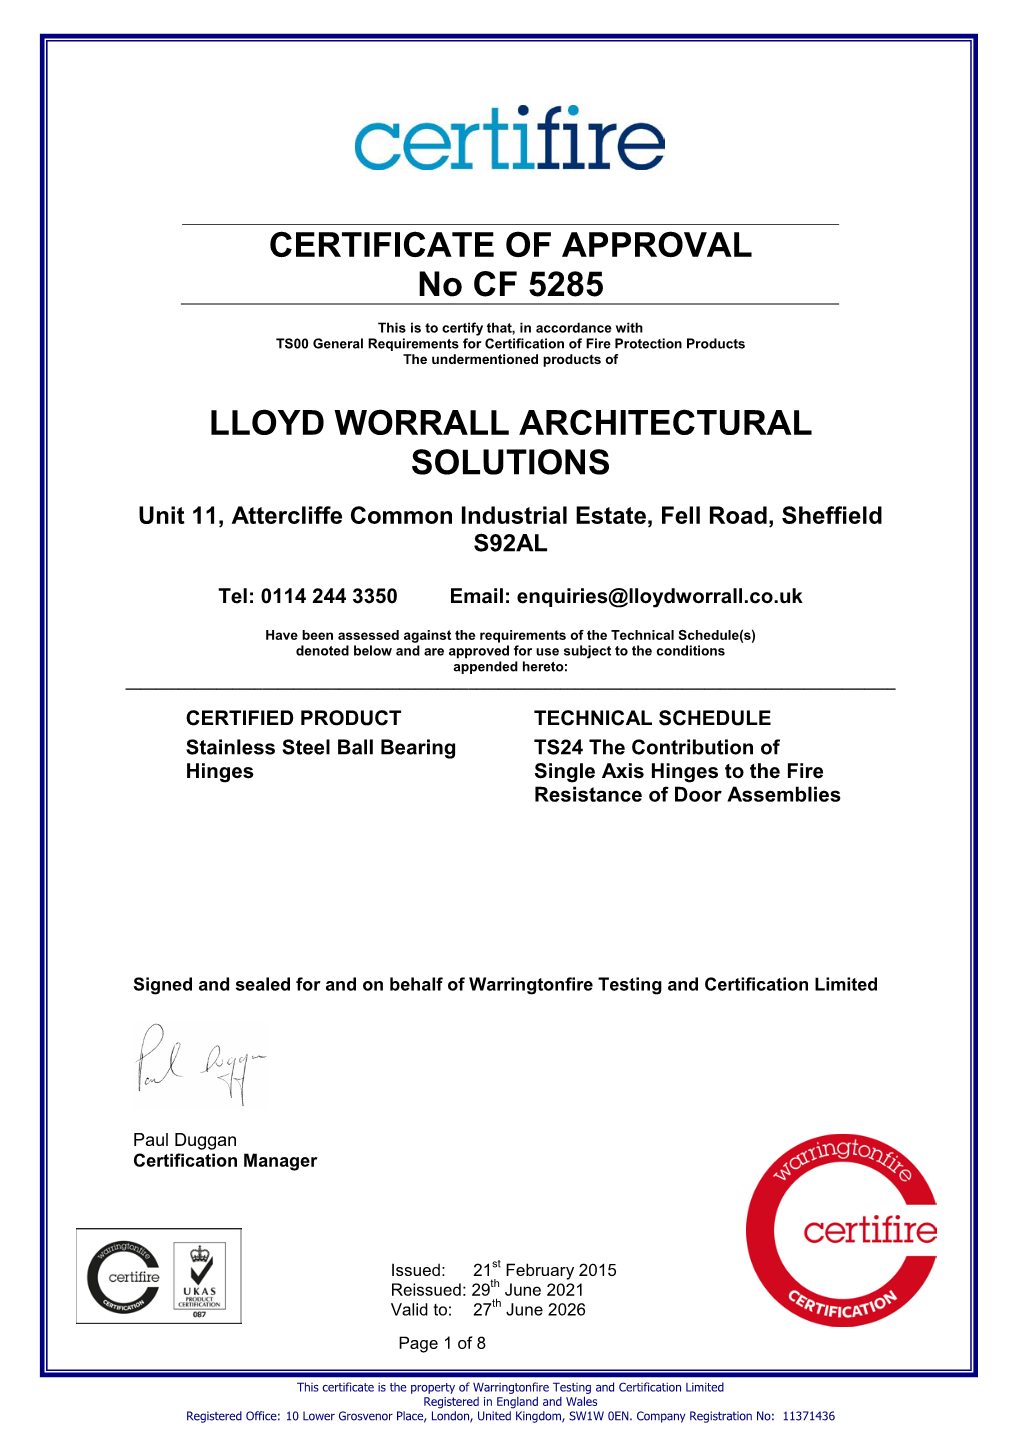 CERTIFICATE of APPROVAL No CF 5285 LLOYD WORRALL